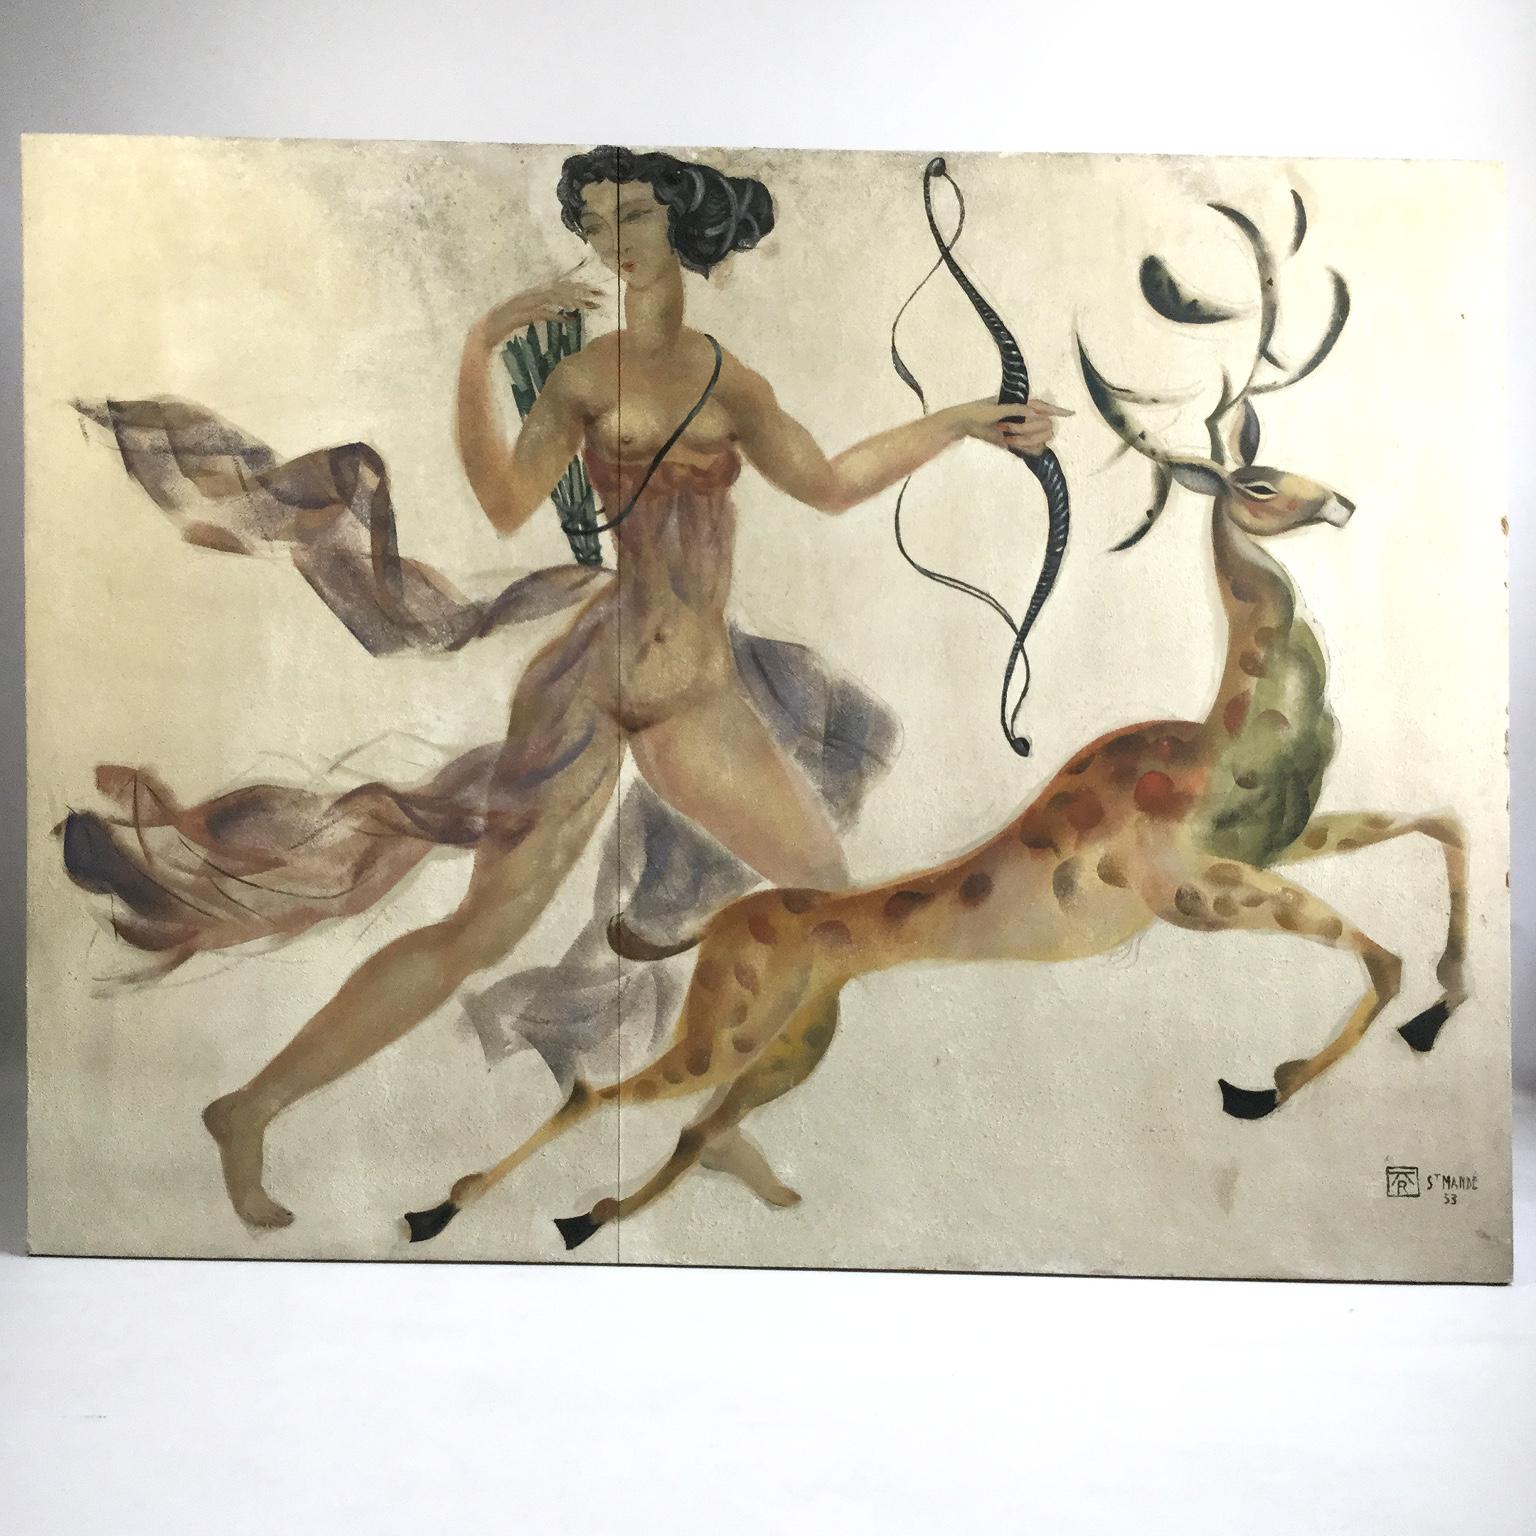 French 1950s Decorative Art Nude Painting on Masonite Panel in a Style of Art Deco